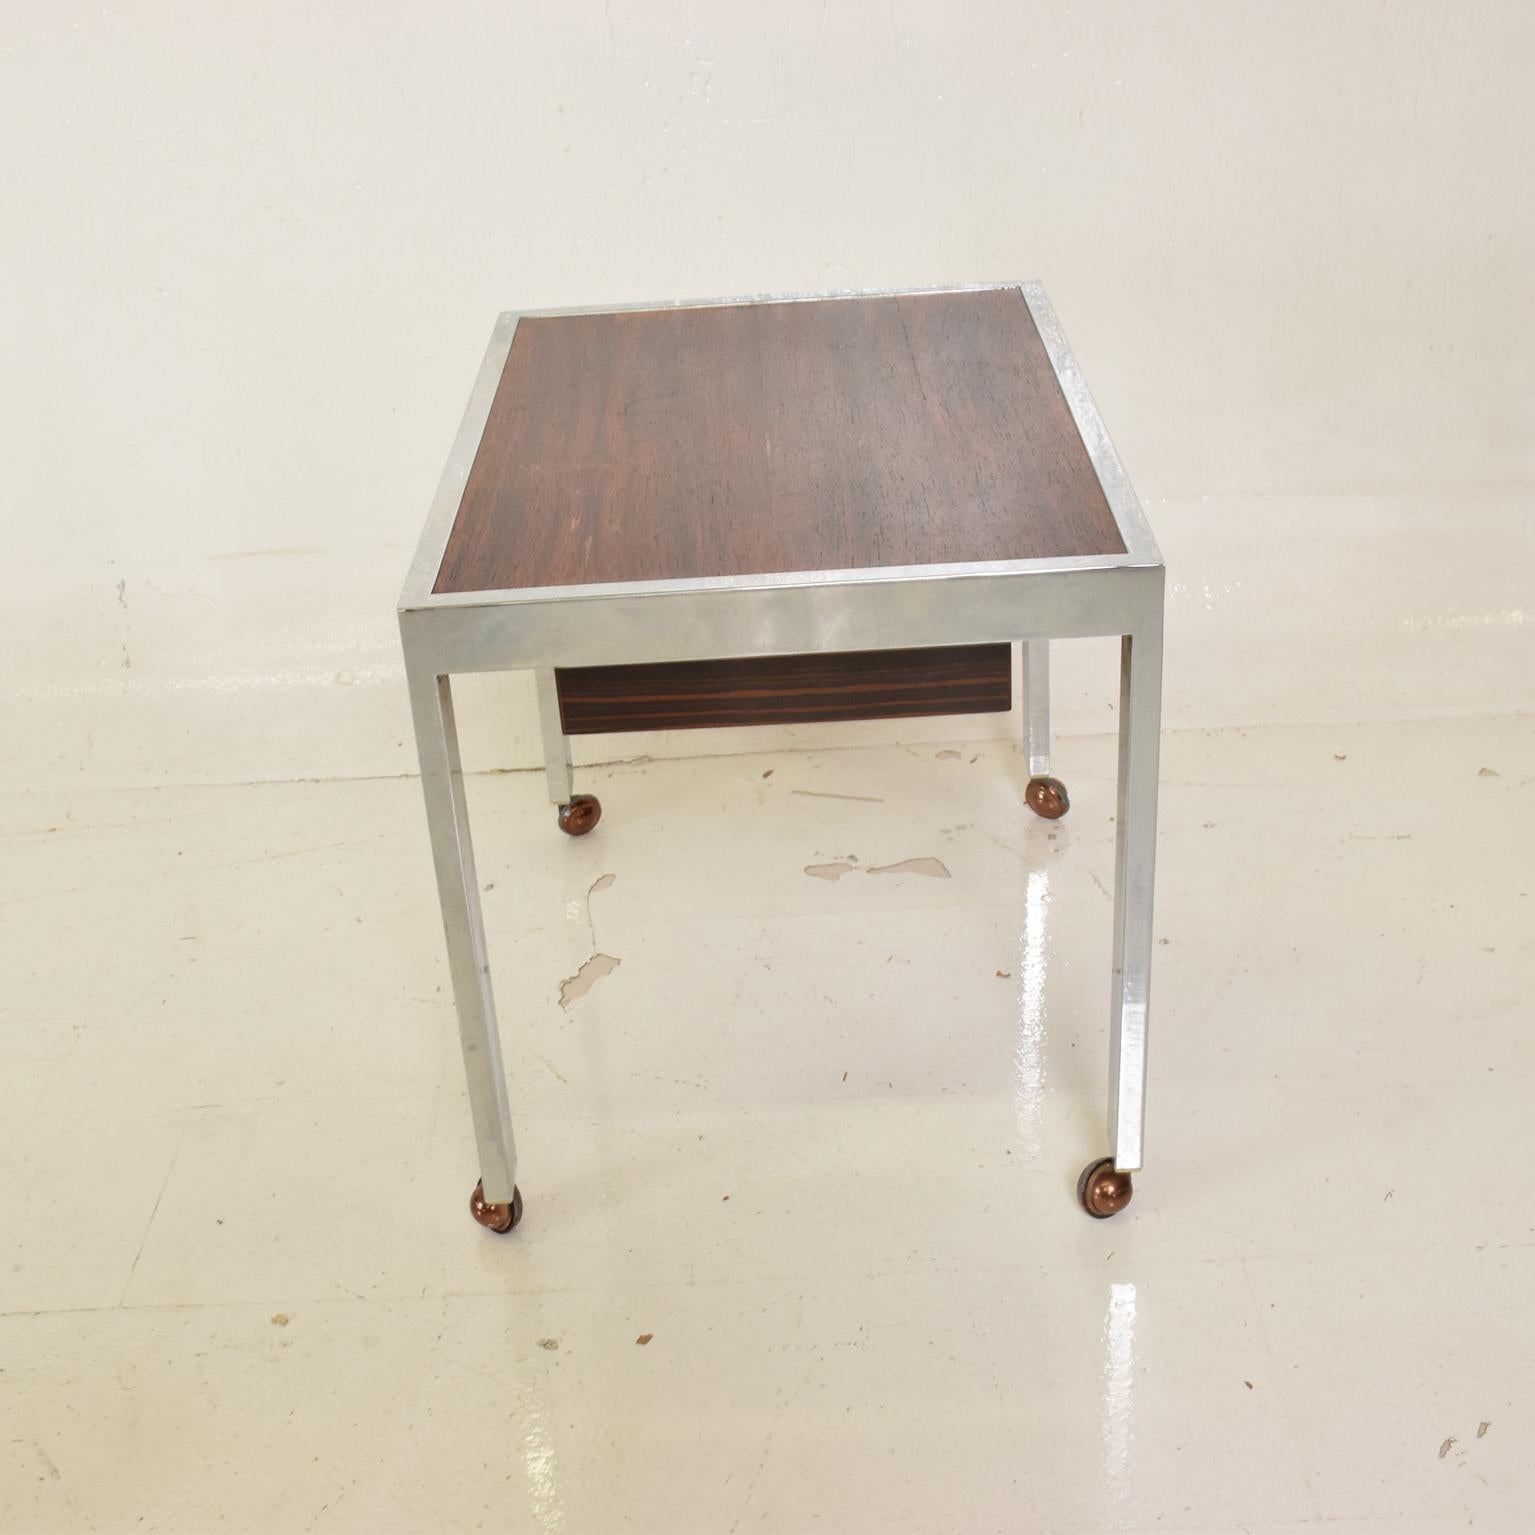 For your consideration, a Scandinavian Danish modern side table in rosewood and chrome.

Unmarked. Very good vintage condition. Refer to images. 

Denmark, circa 1960s.

Dimensions: 20